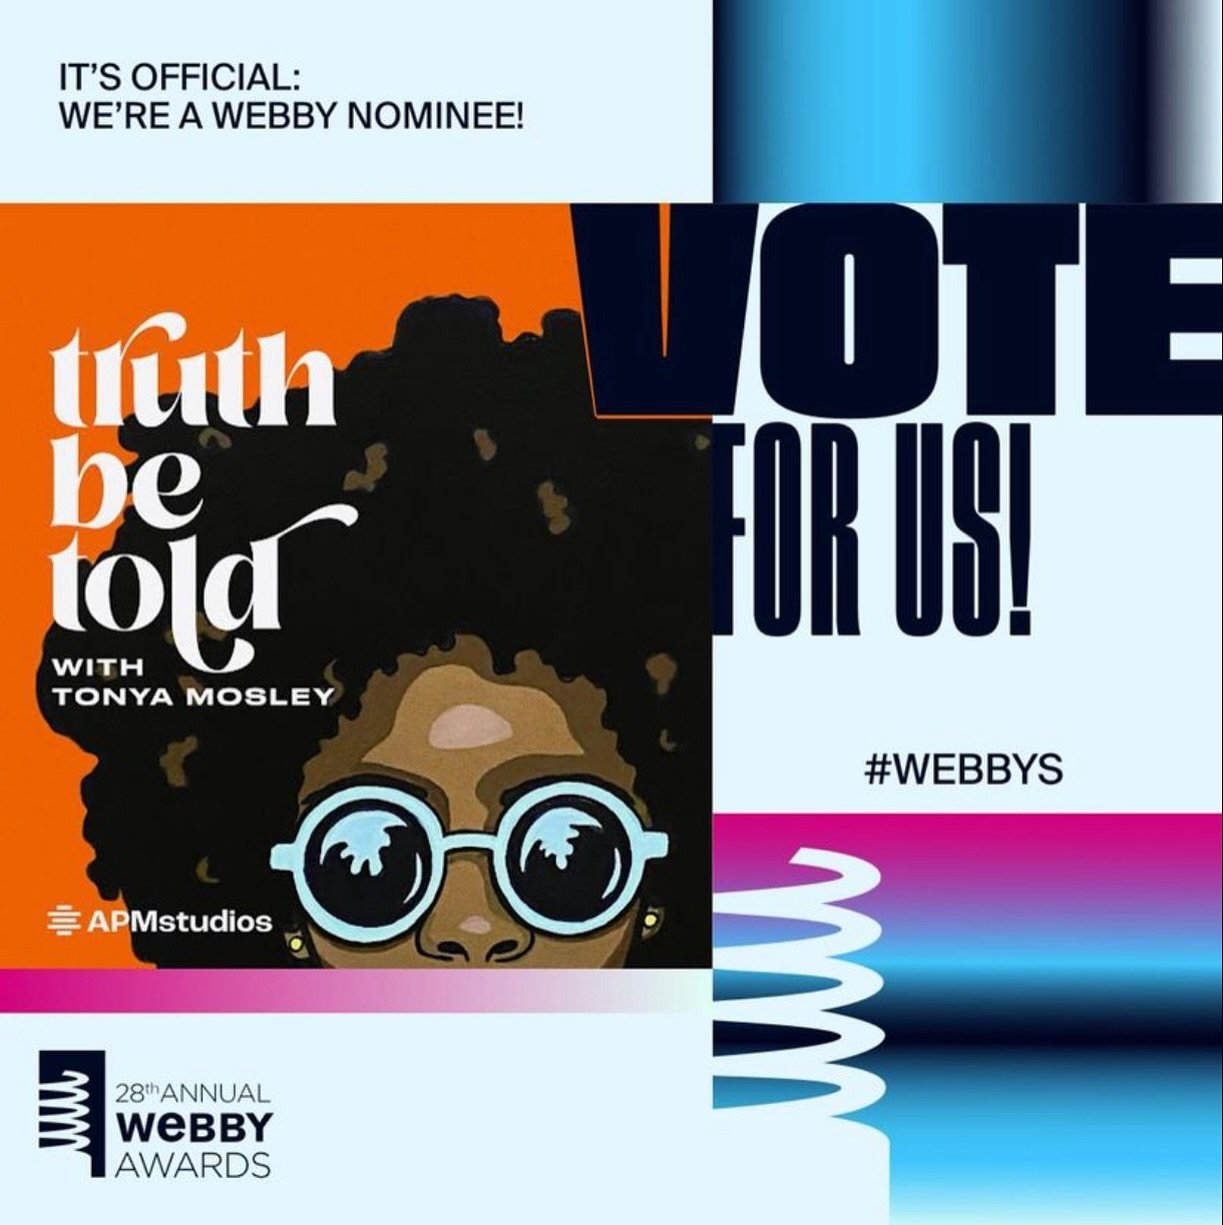 @deartbt with @tonyatalks is nominated for @thewebbyawards in the &ldquo;Best Documentary Limited Series&rdquo; category! Was honored to score this show last year, and see it continue to get recognition. 

The Webbys are open to public voting so ever